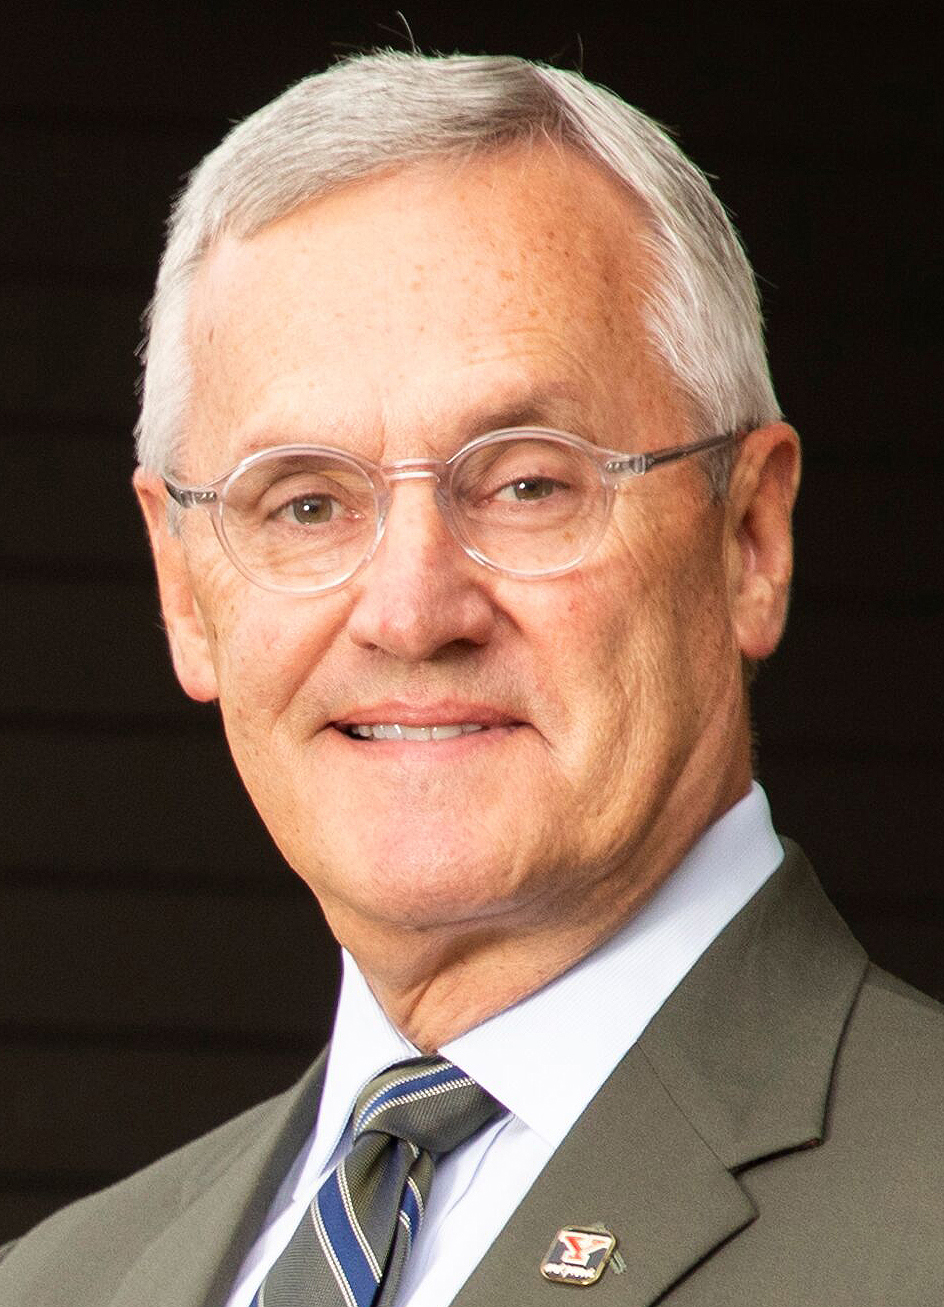 President of Youngstown State University Jim Tressel 